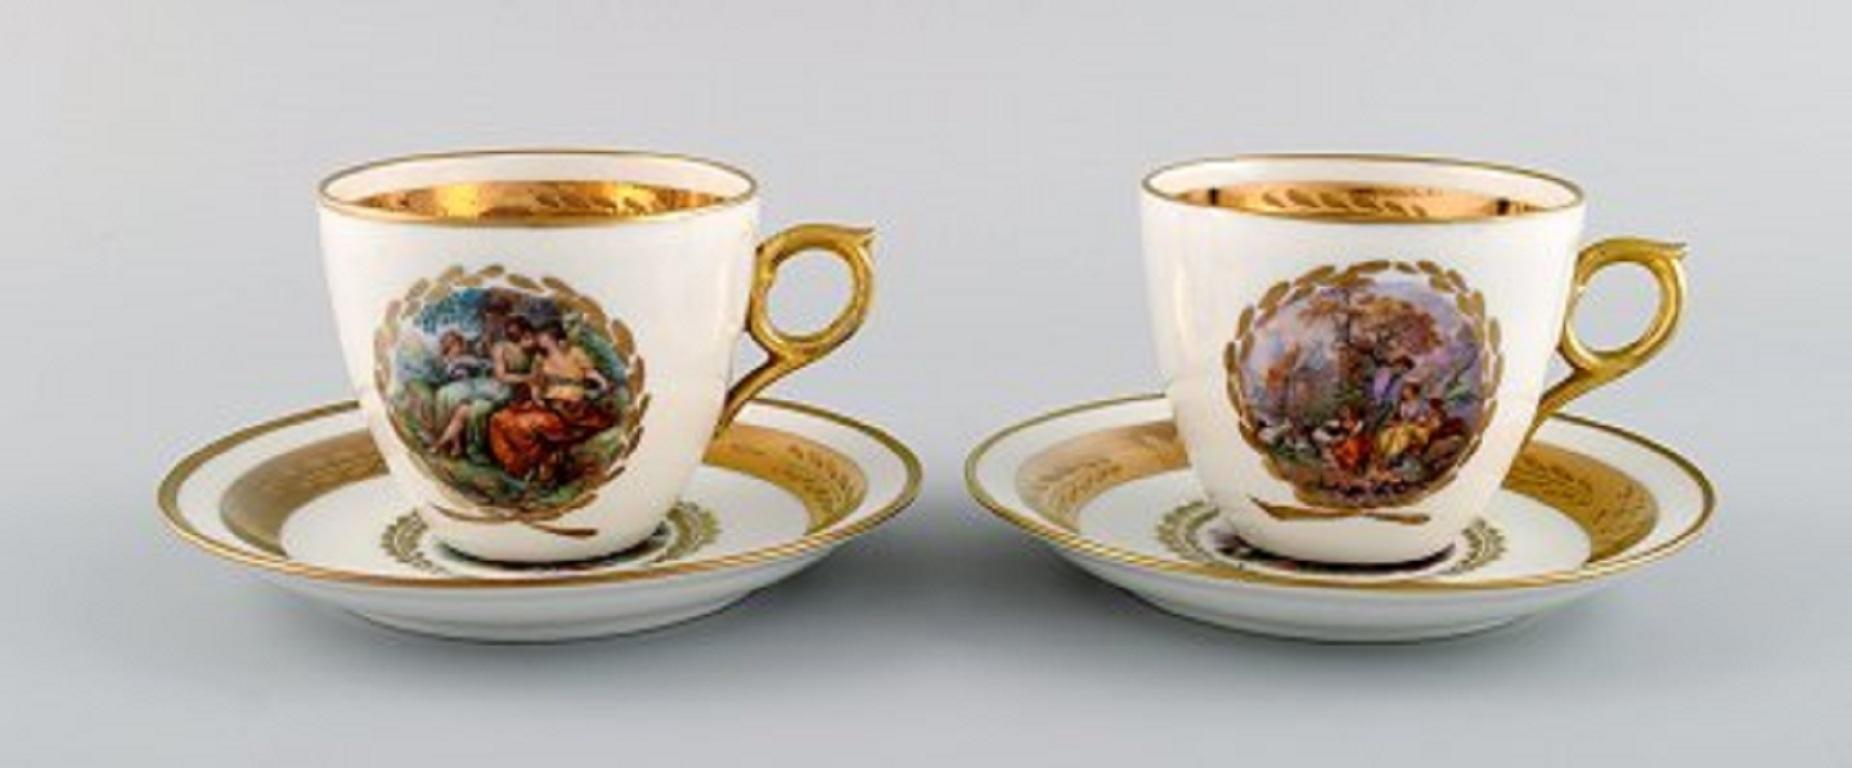 Six Royal Copenhagen coffee cups with saucers in porcelain with romantic scenes and gold decoration,
20th century.
The coffee cup measures: 8 x 6.5 cm.
Saucer diameter 13 cm.
Stamped.
In excellent condition.
2nd factory quality.